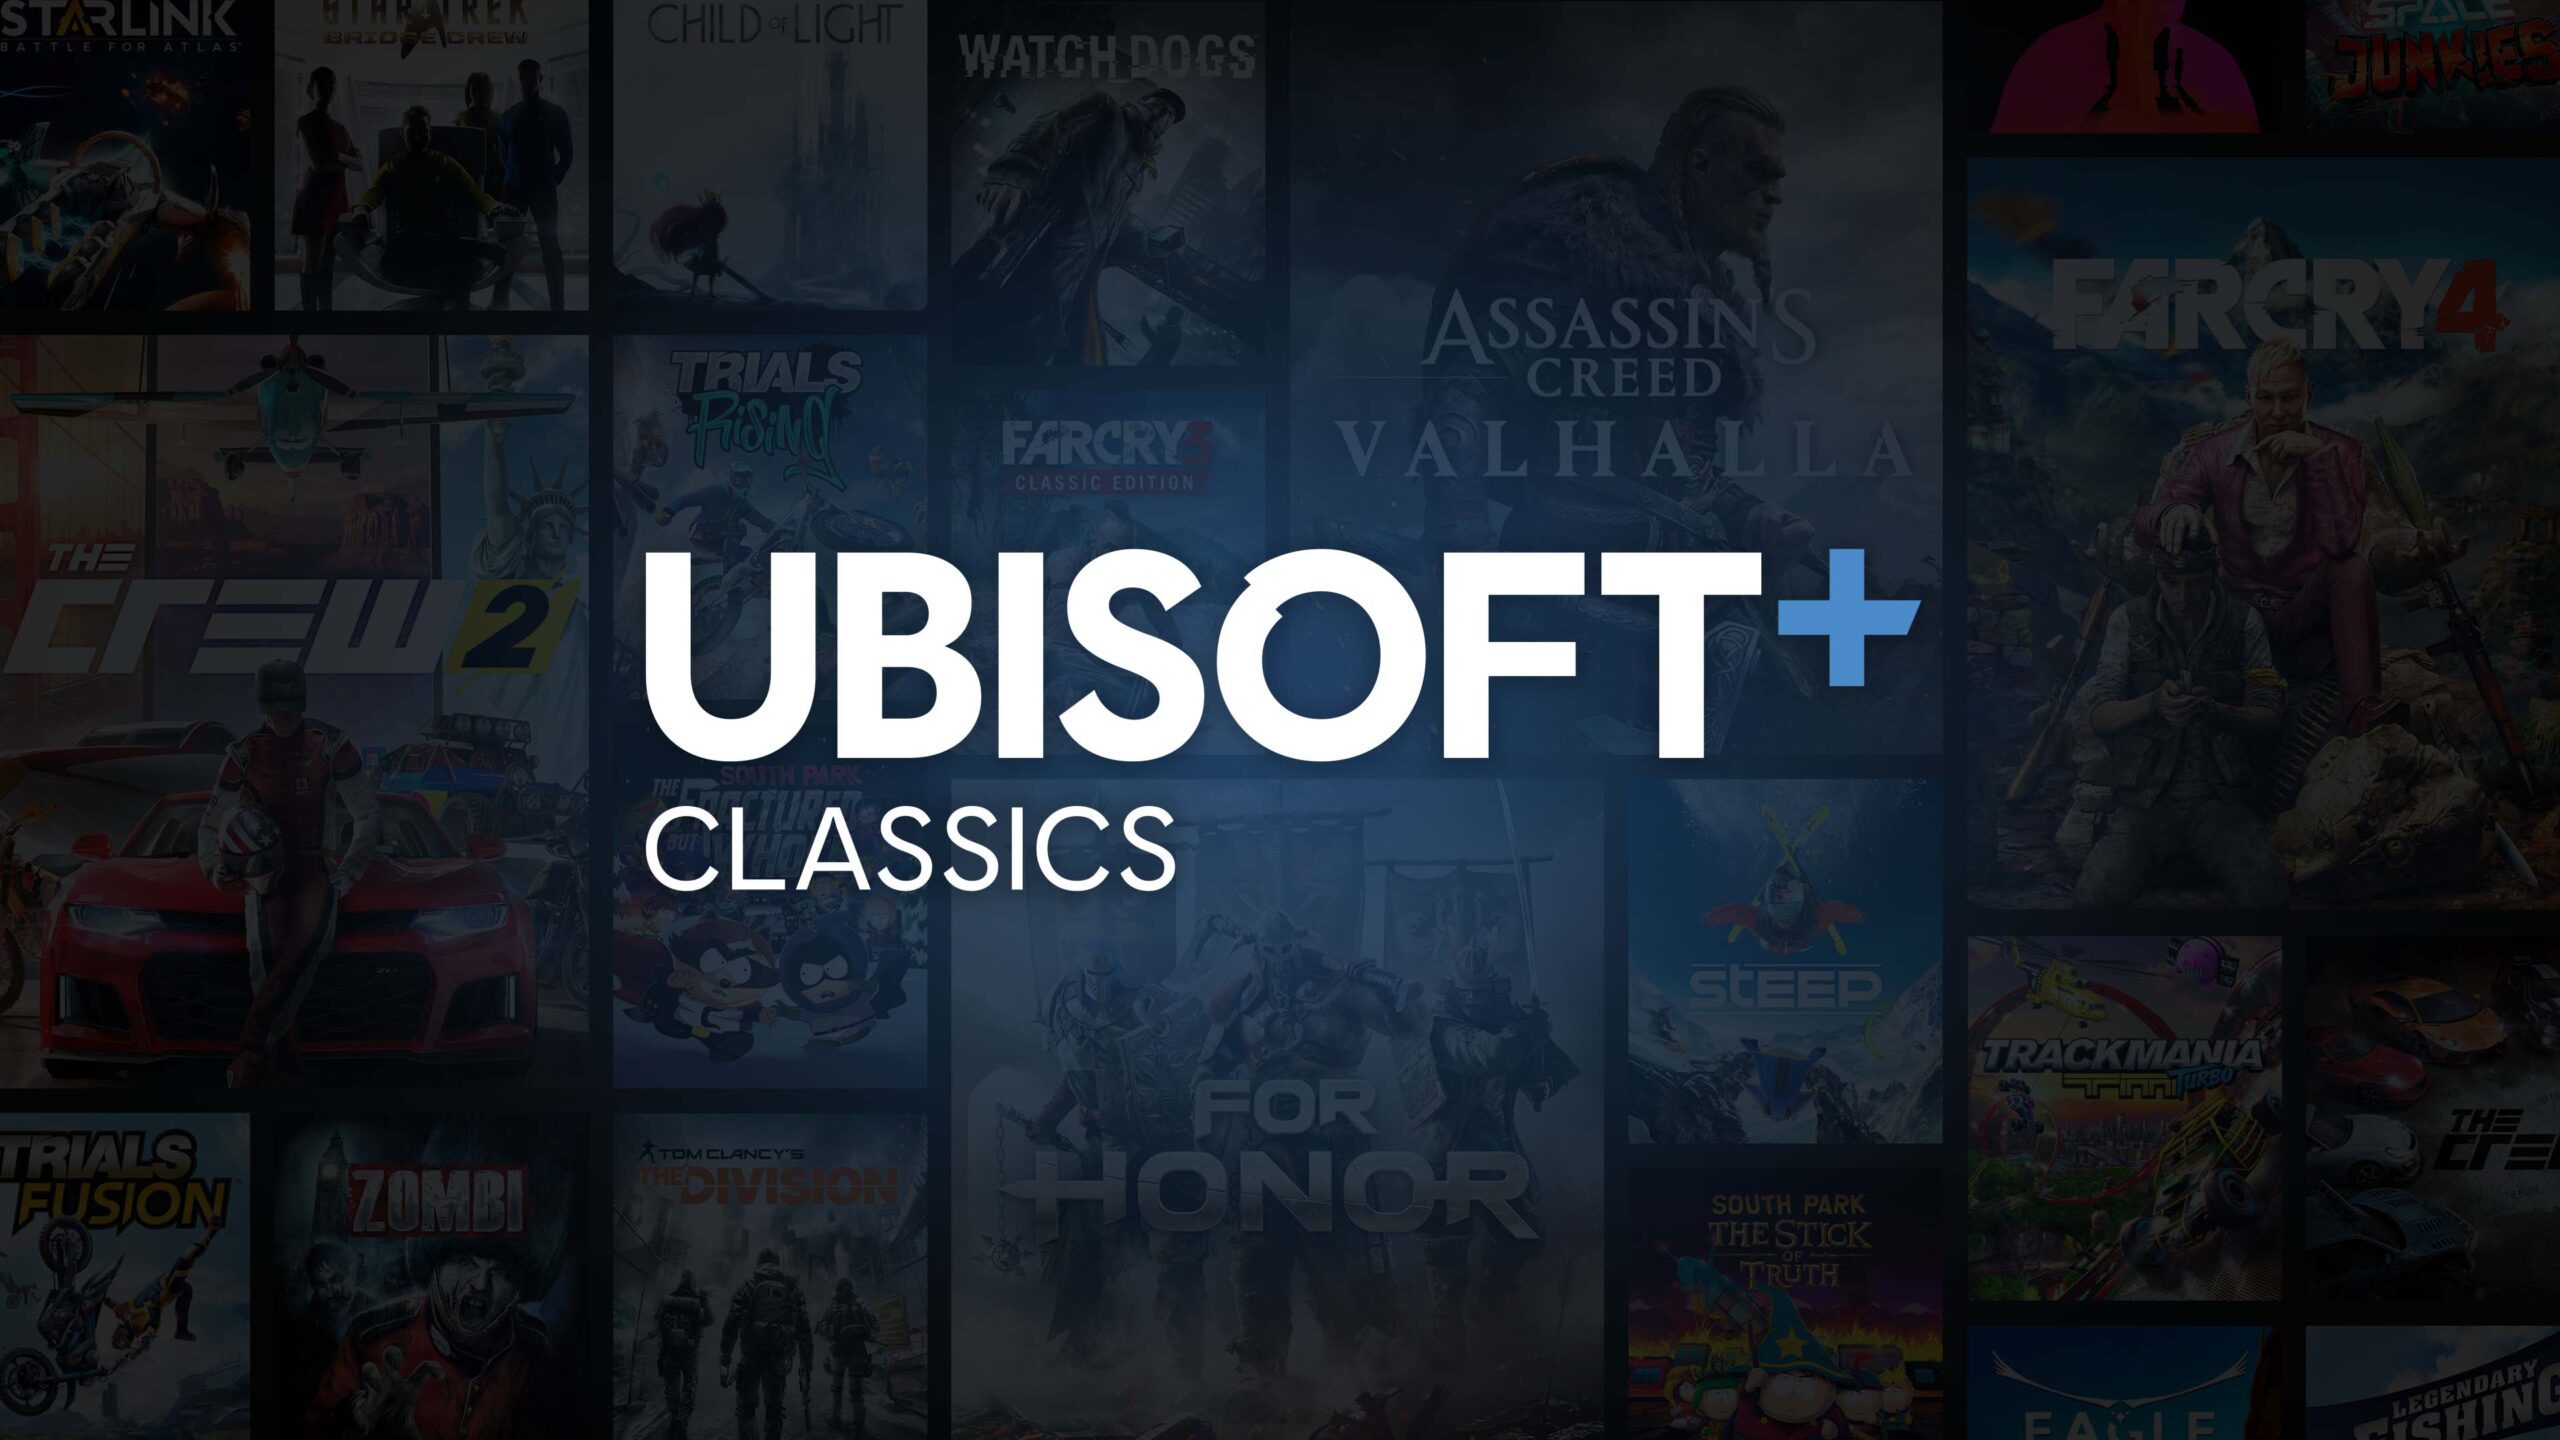 More Assassin’s Creed coming to Ubisoft+ Classics – PlayStation.Blog